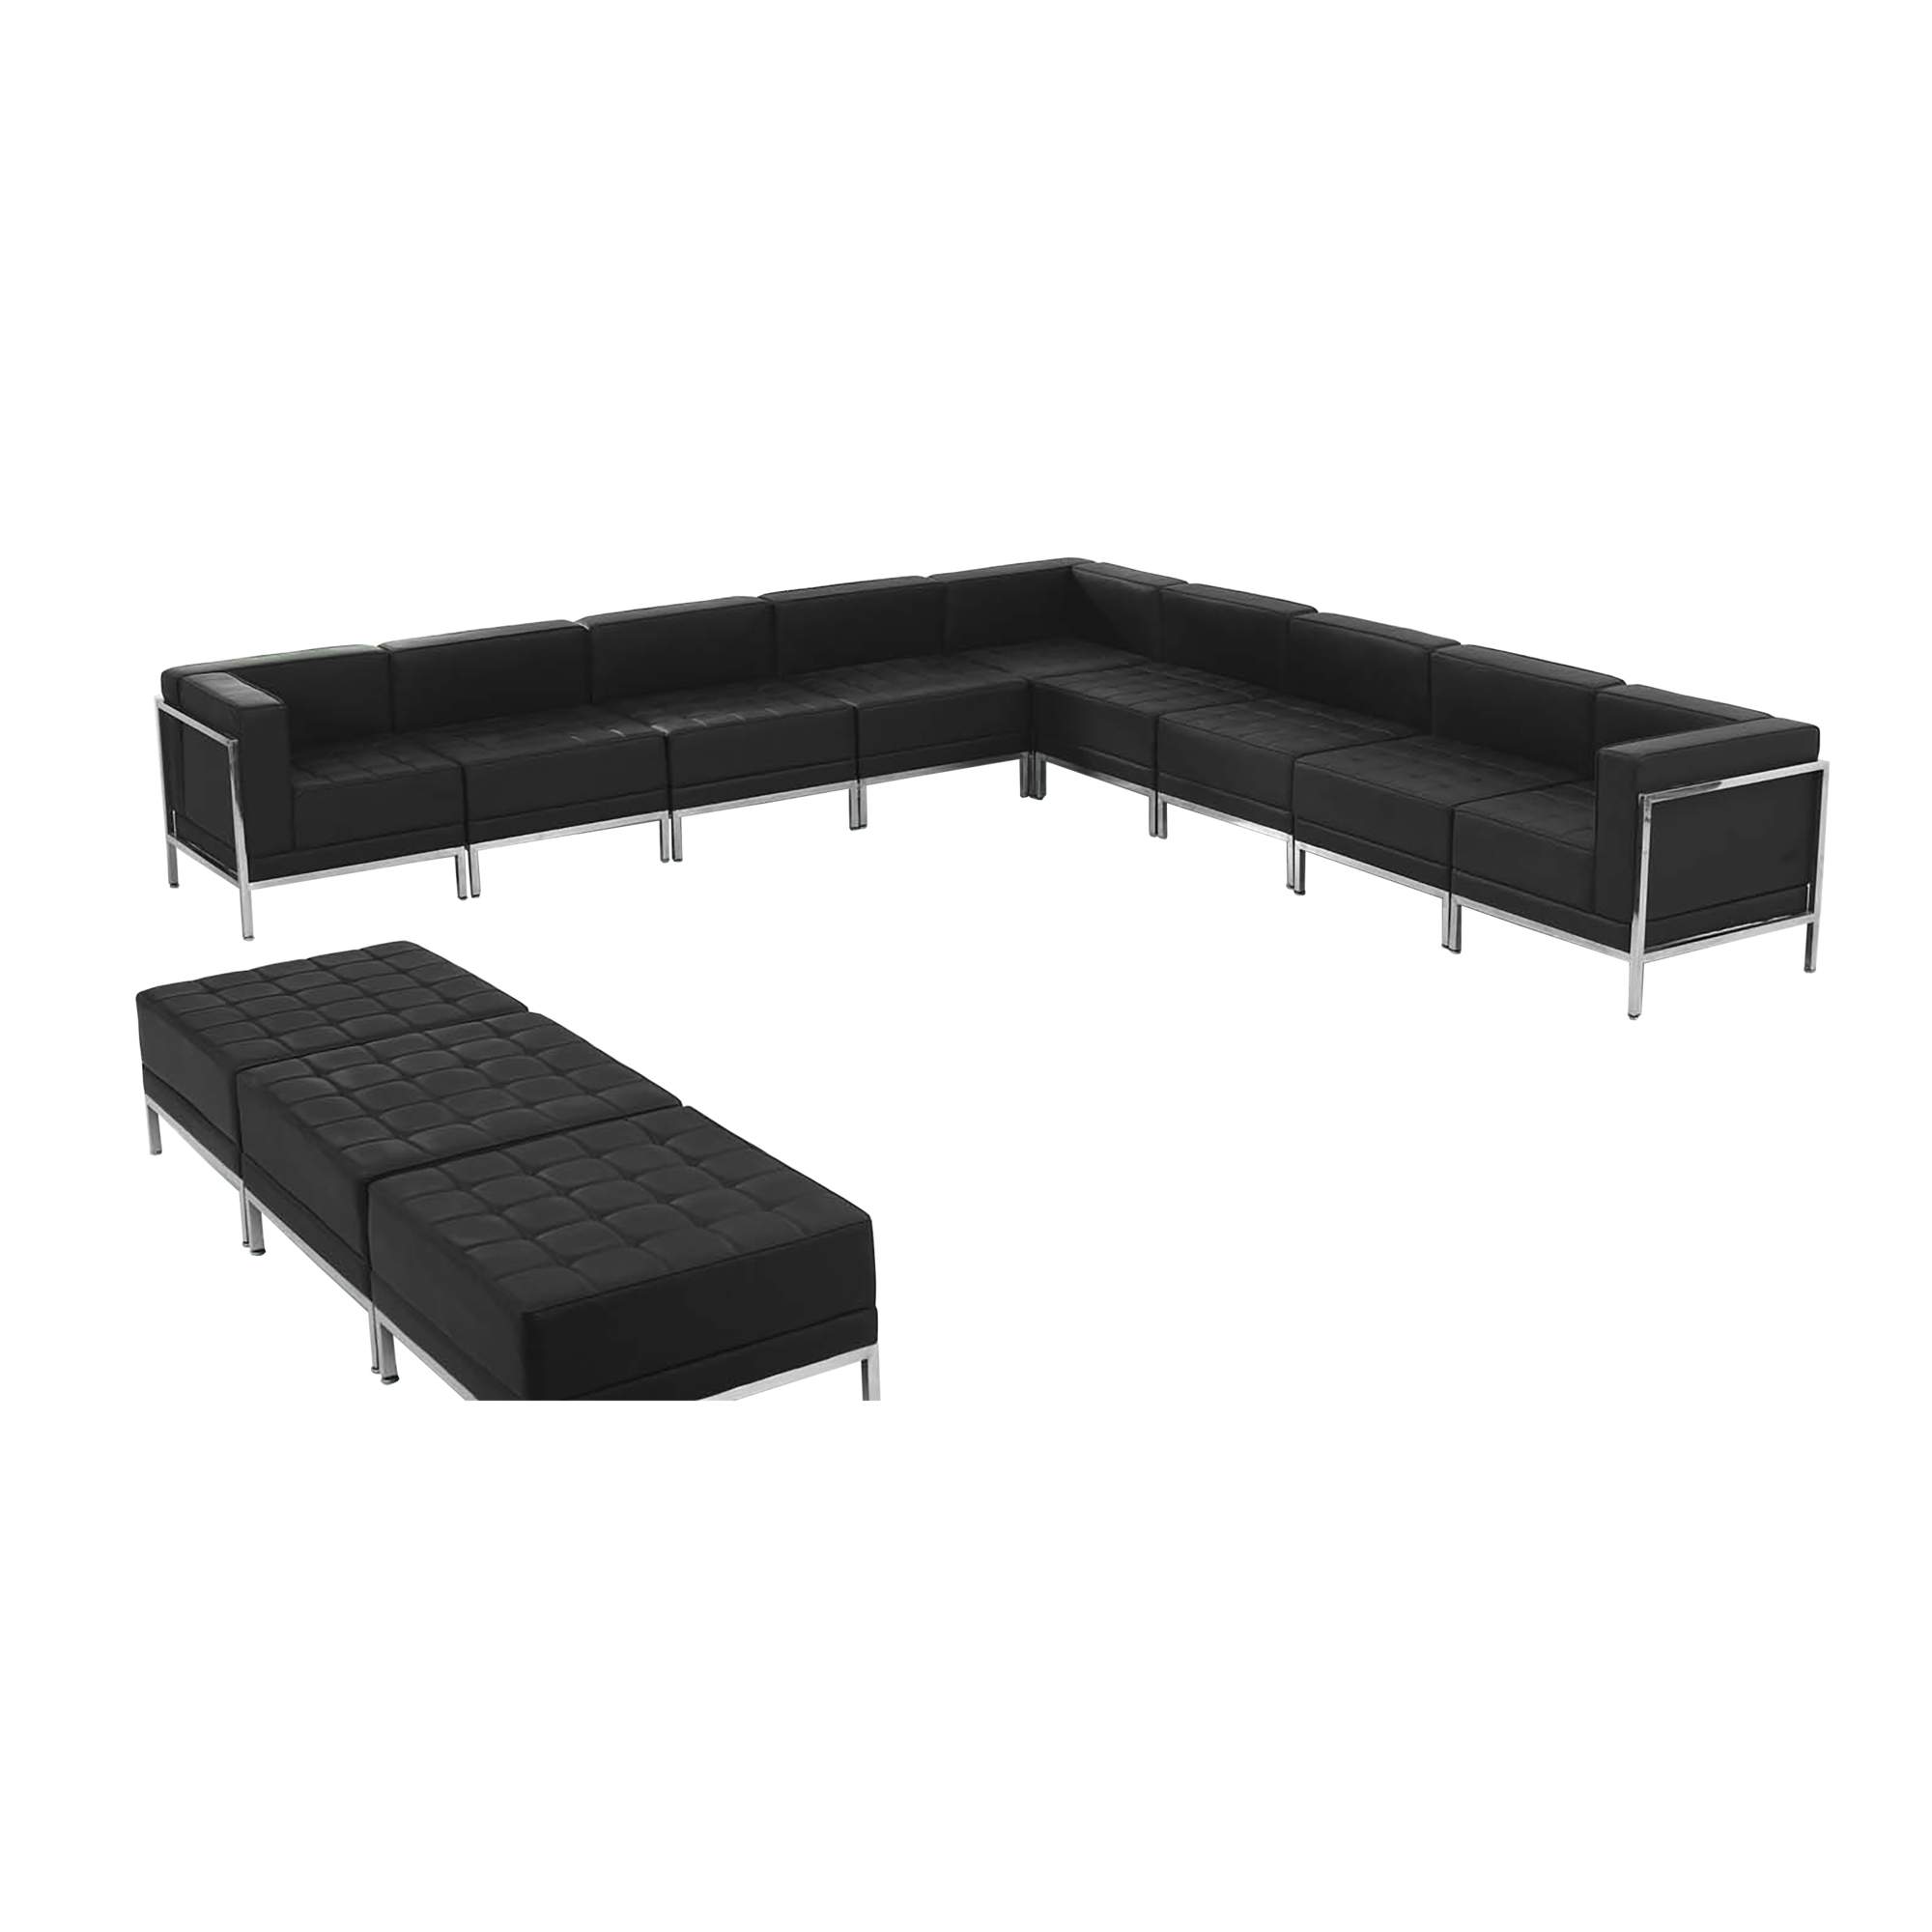 Flash Furniture, 12 Piece Black LeatherSoft Sectional Ottoman Set, Primary Color Black, Included (qty.) 12, Model ZBIMAGSET18